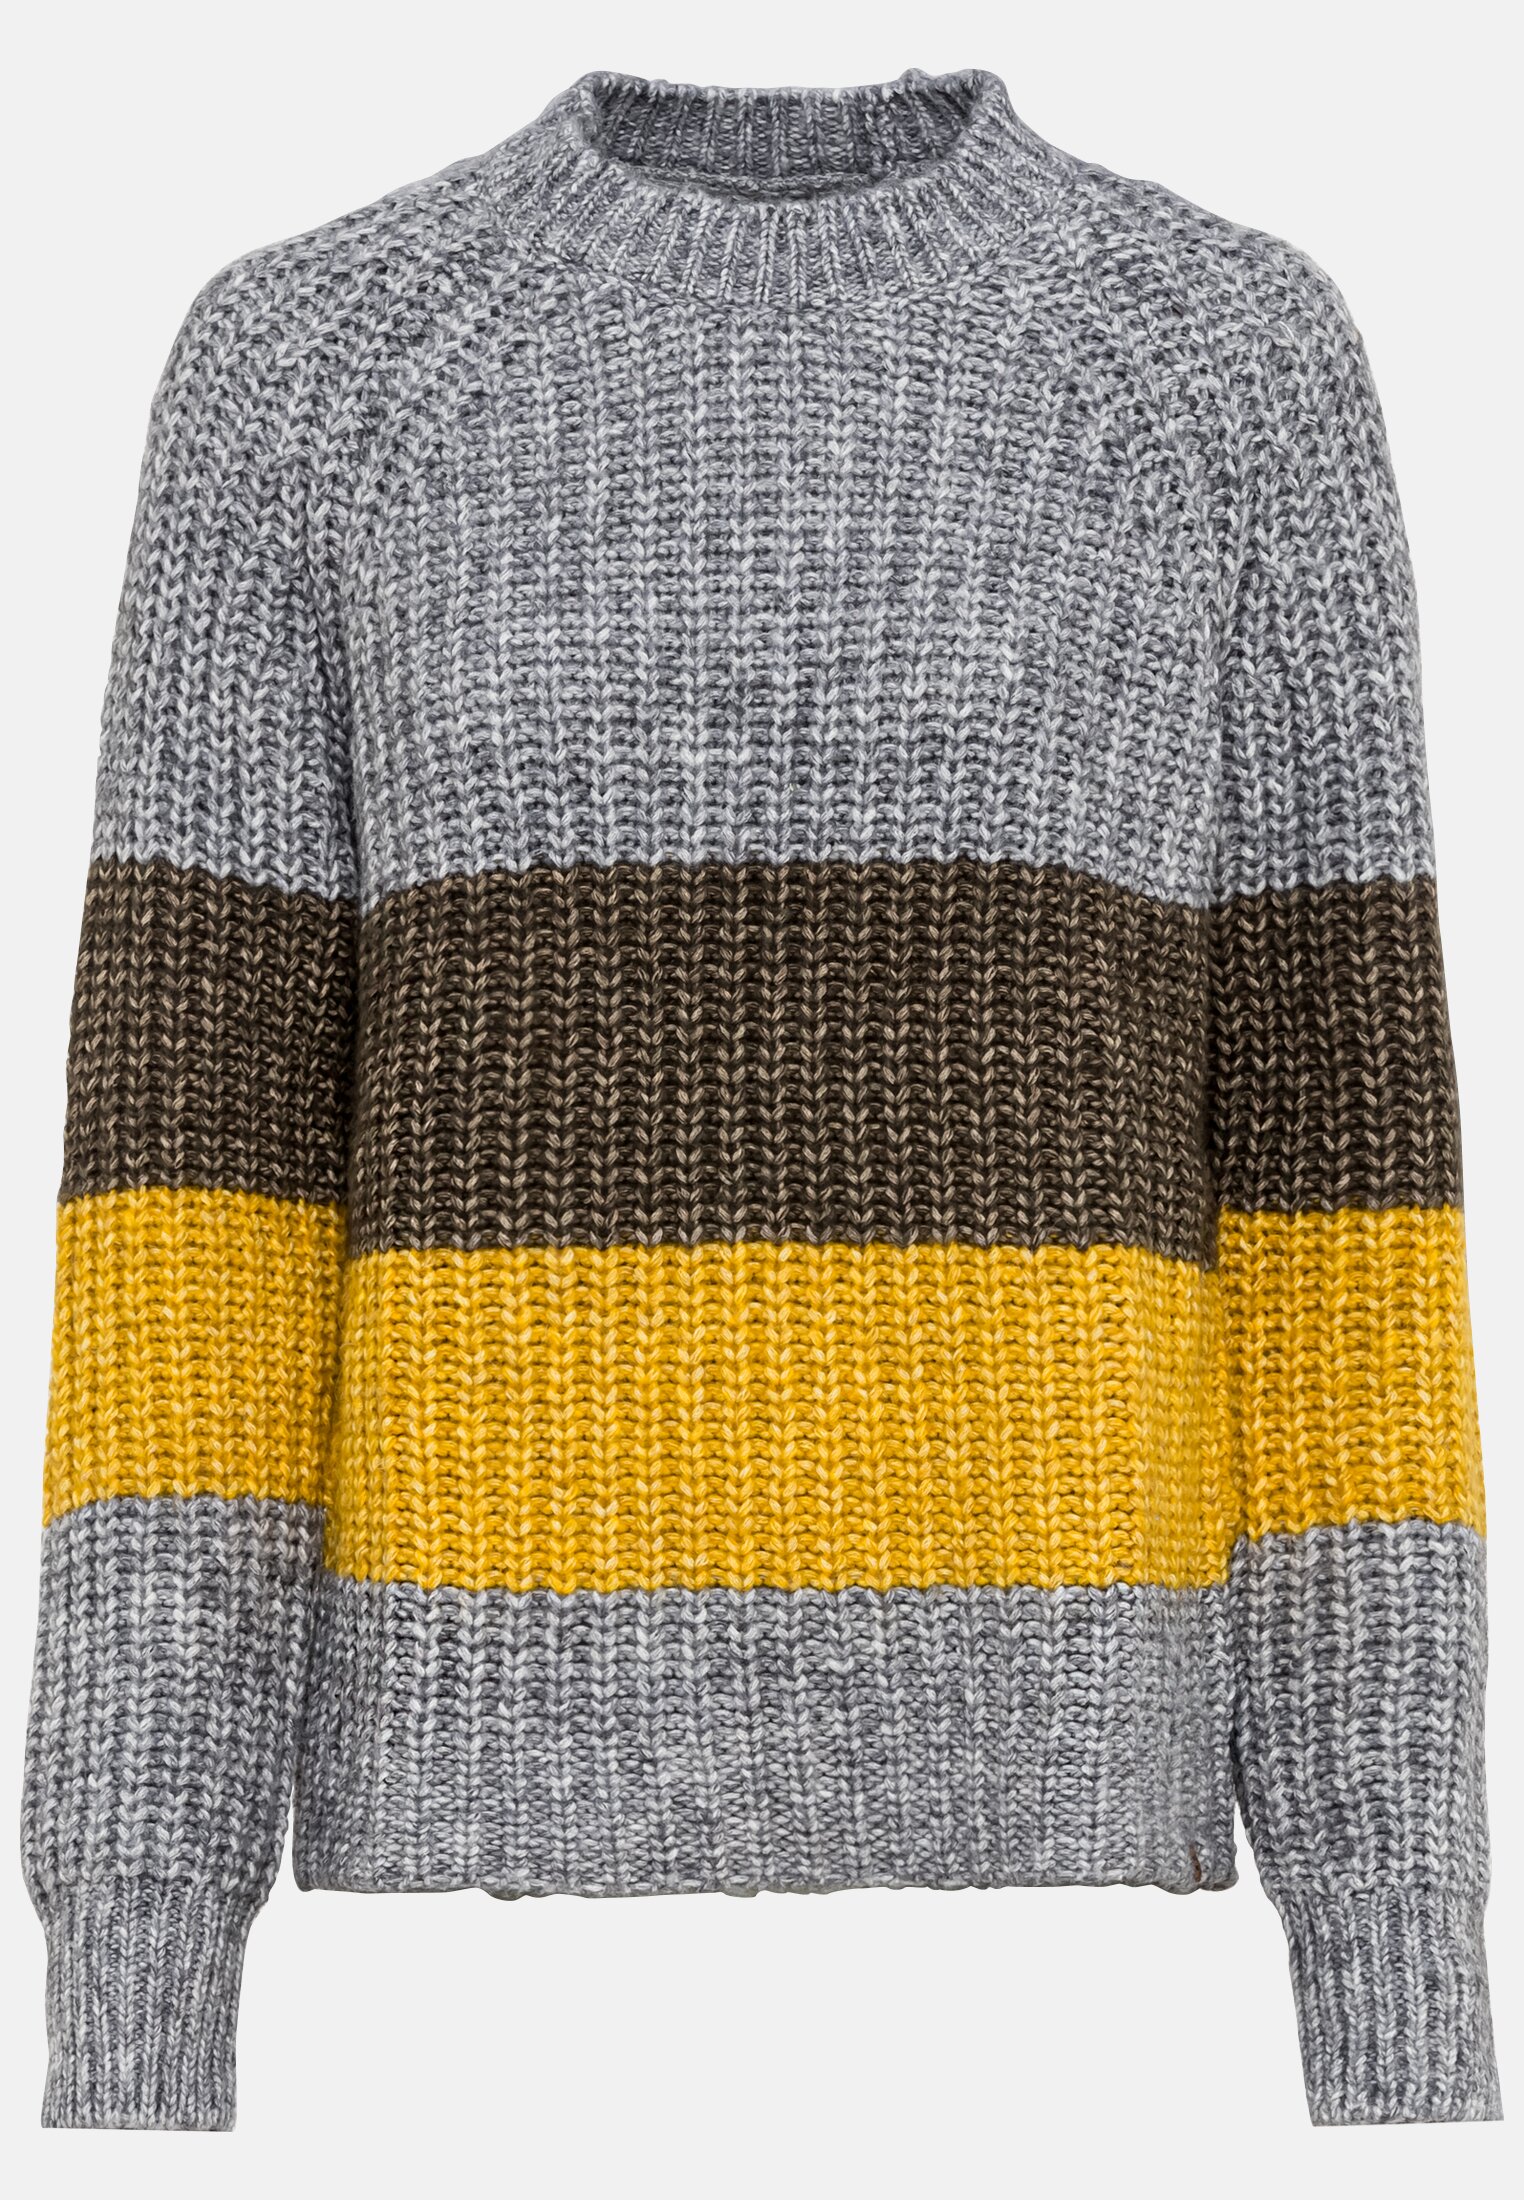 Camel Active Knitted jumper in recycled material mix